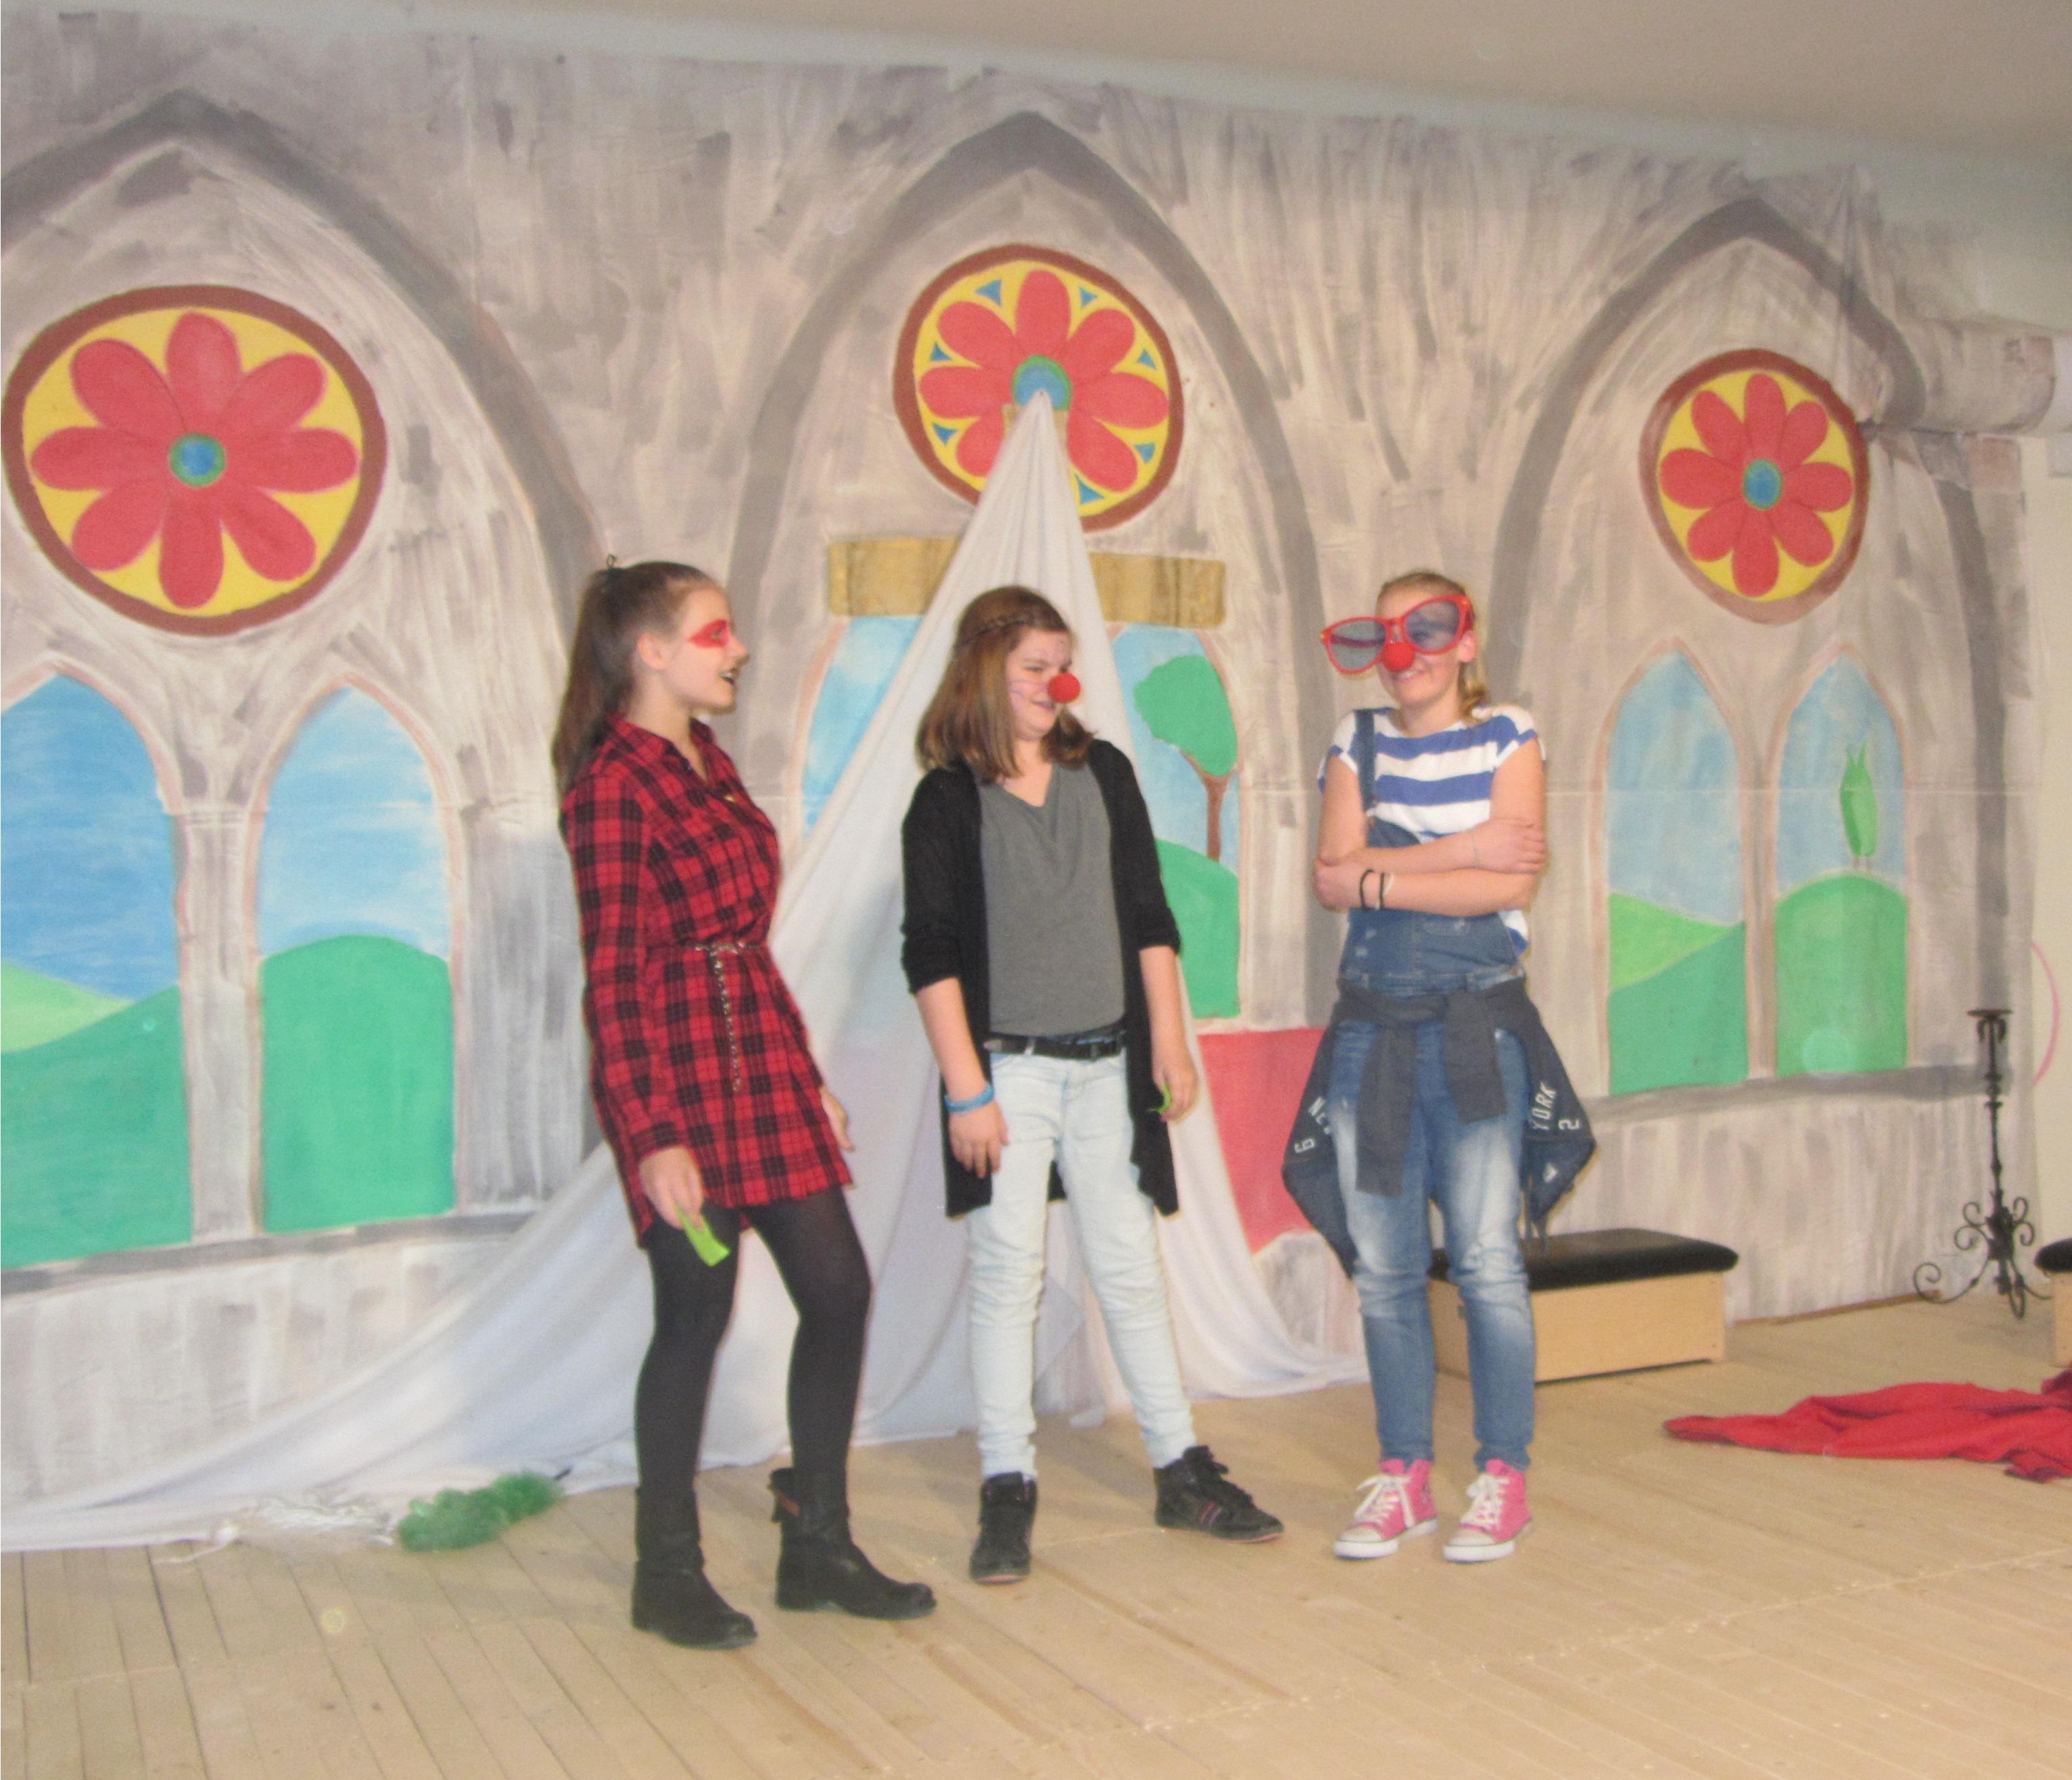 English School Of Budapest: UK Comic Relief Charity Project